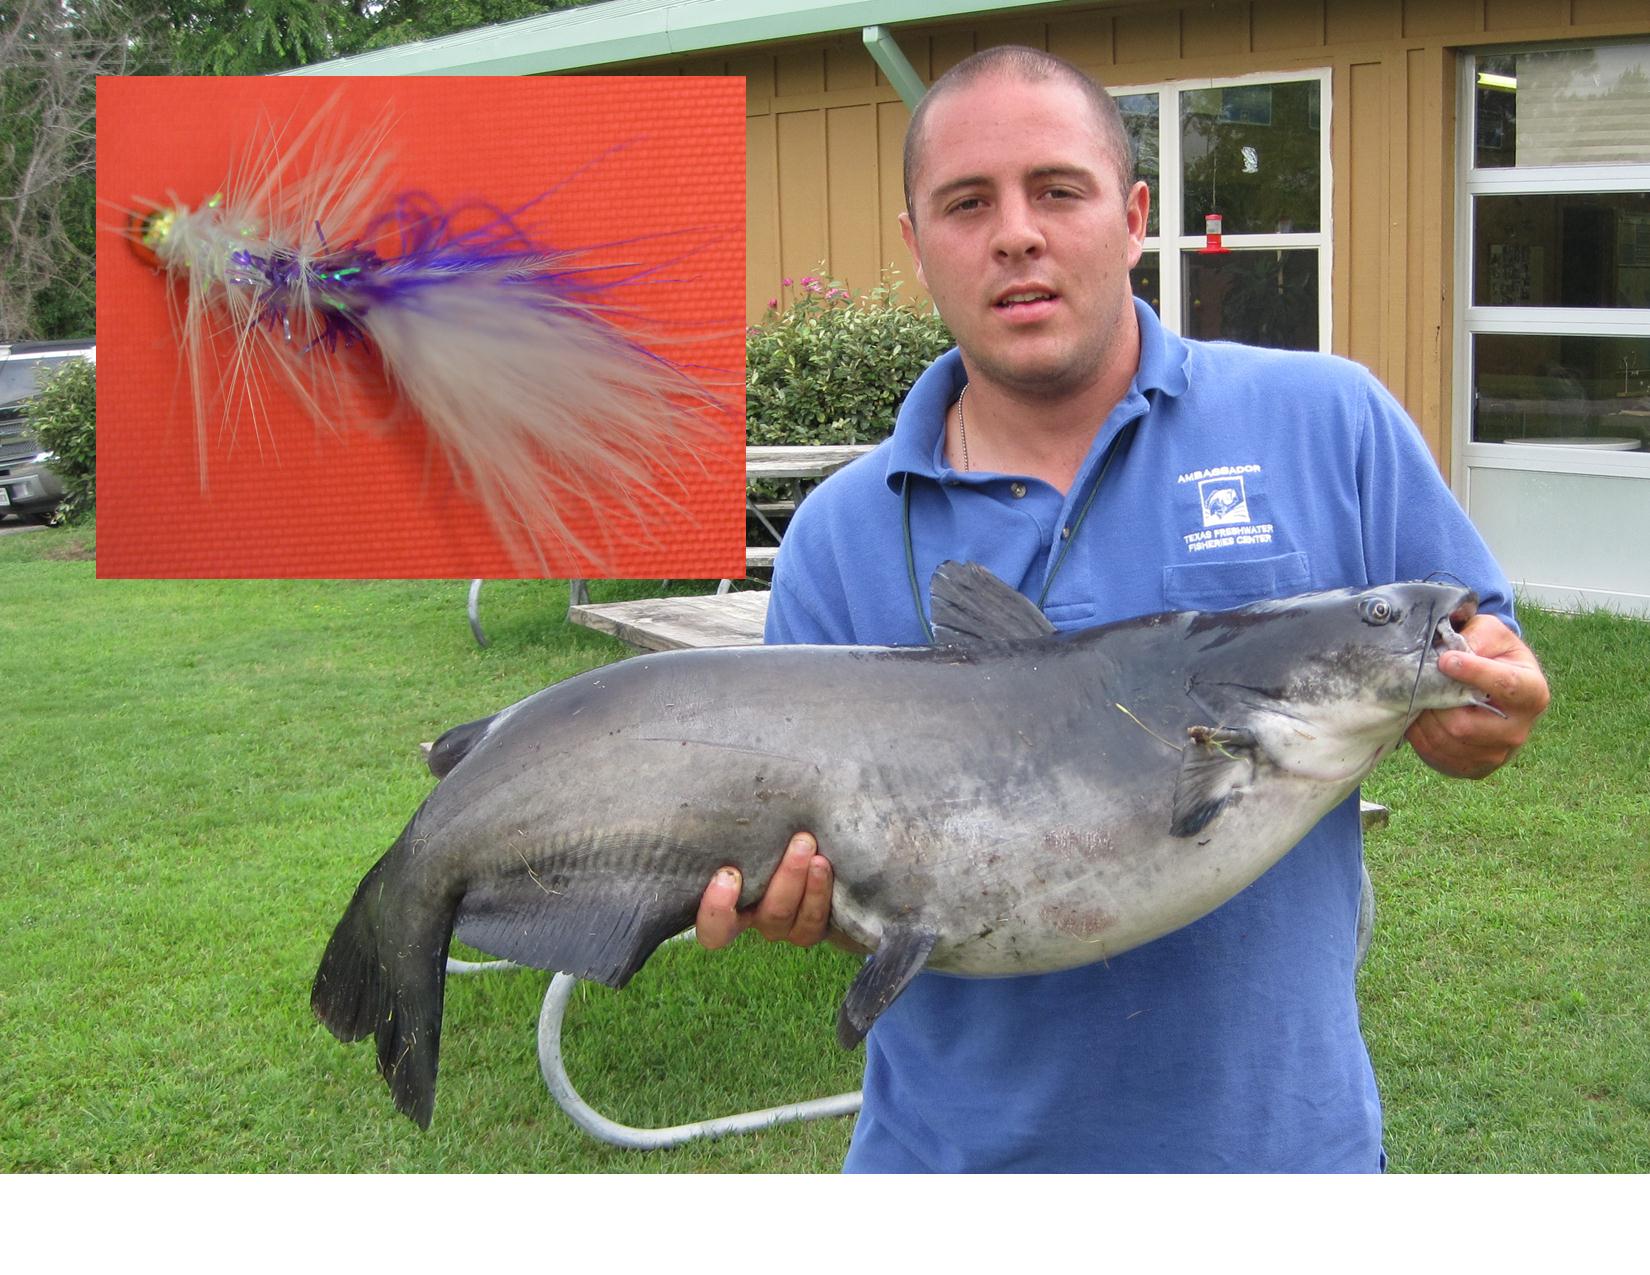 Giant catfish lands Texas angler in state record book.